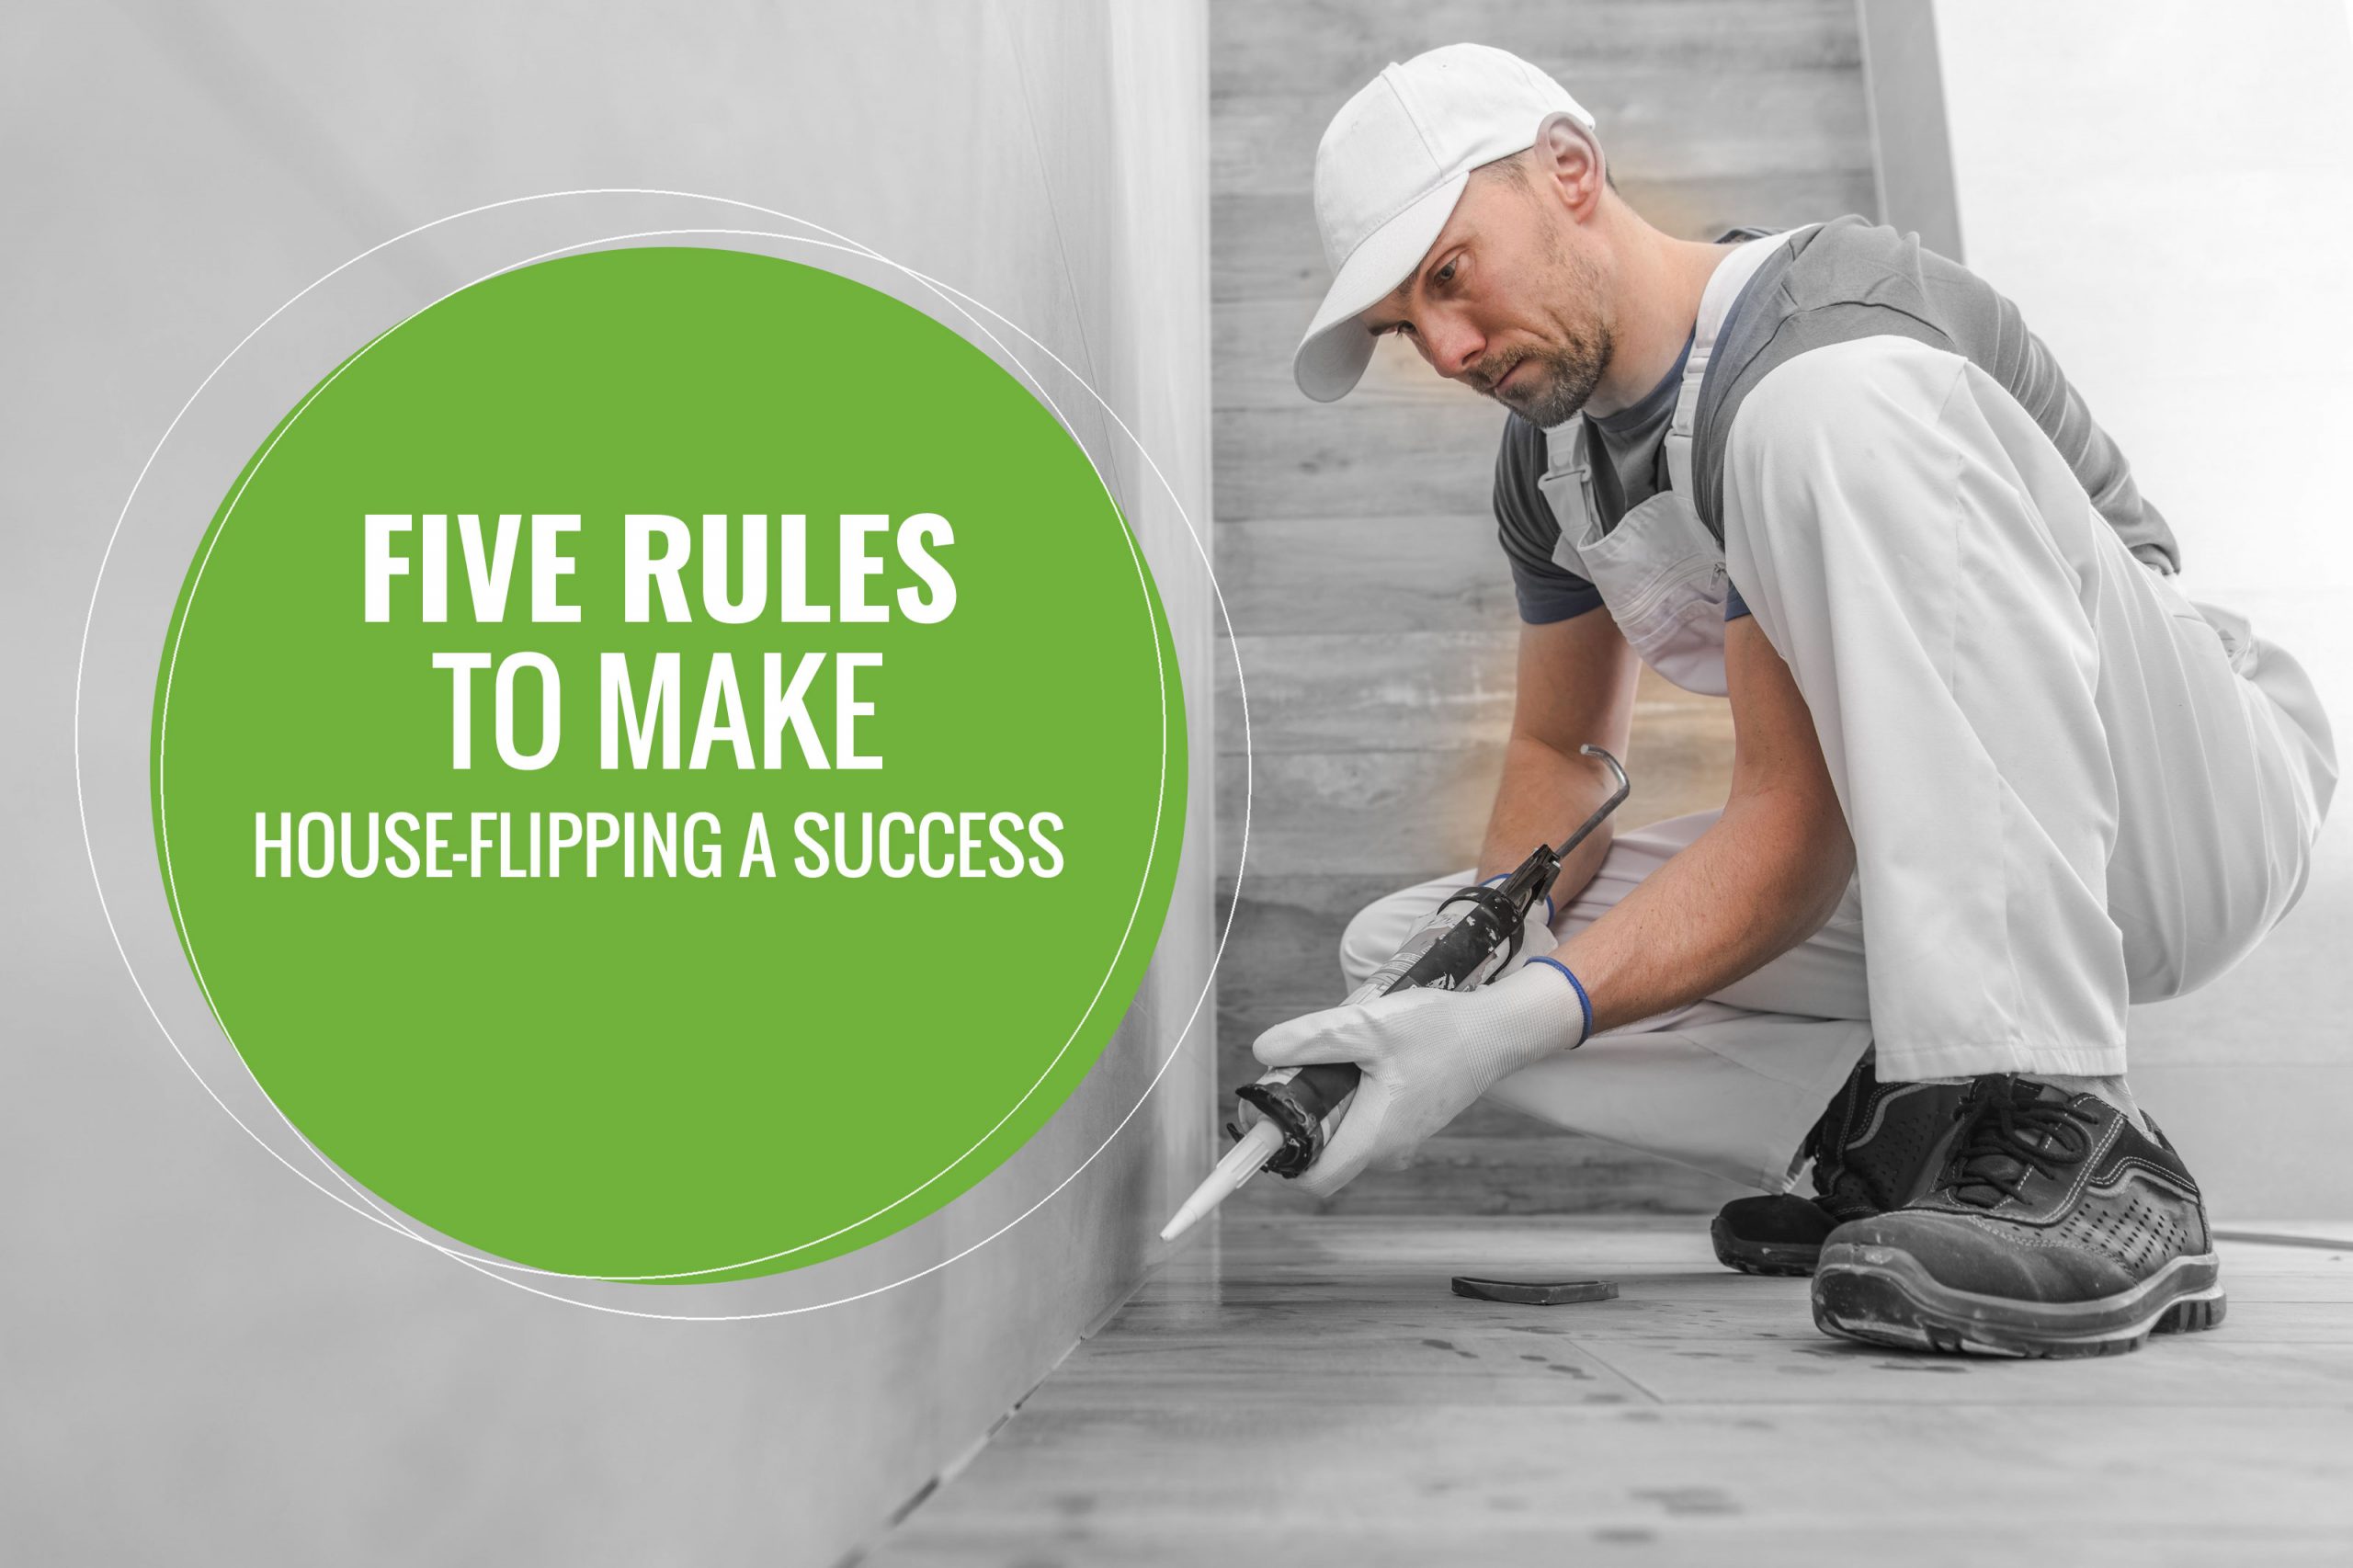 Five Rules to Make House Flipping a Success